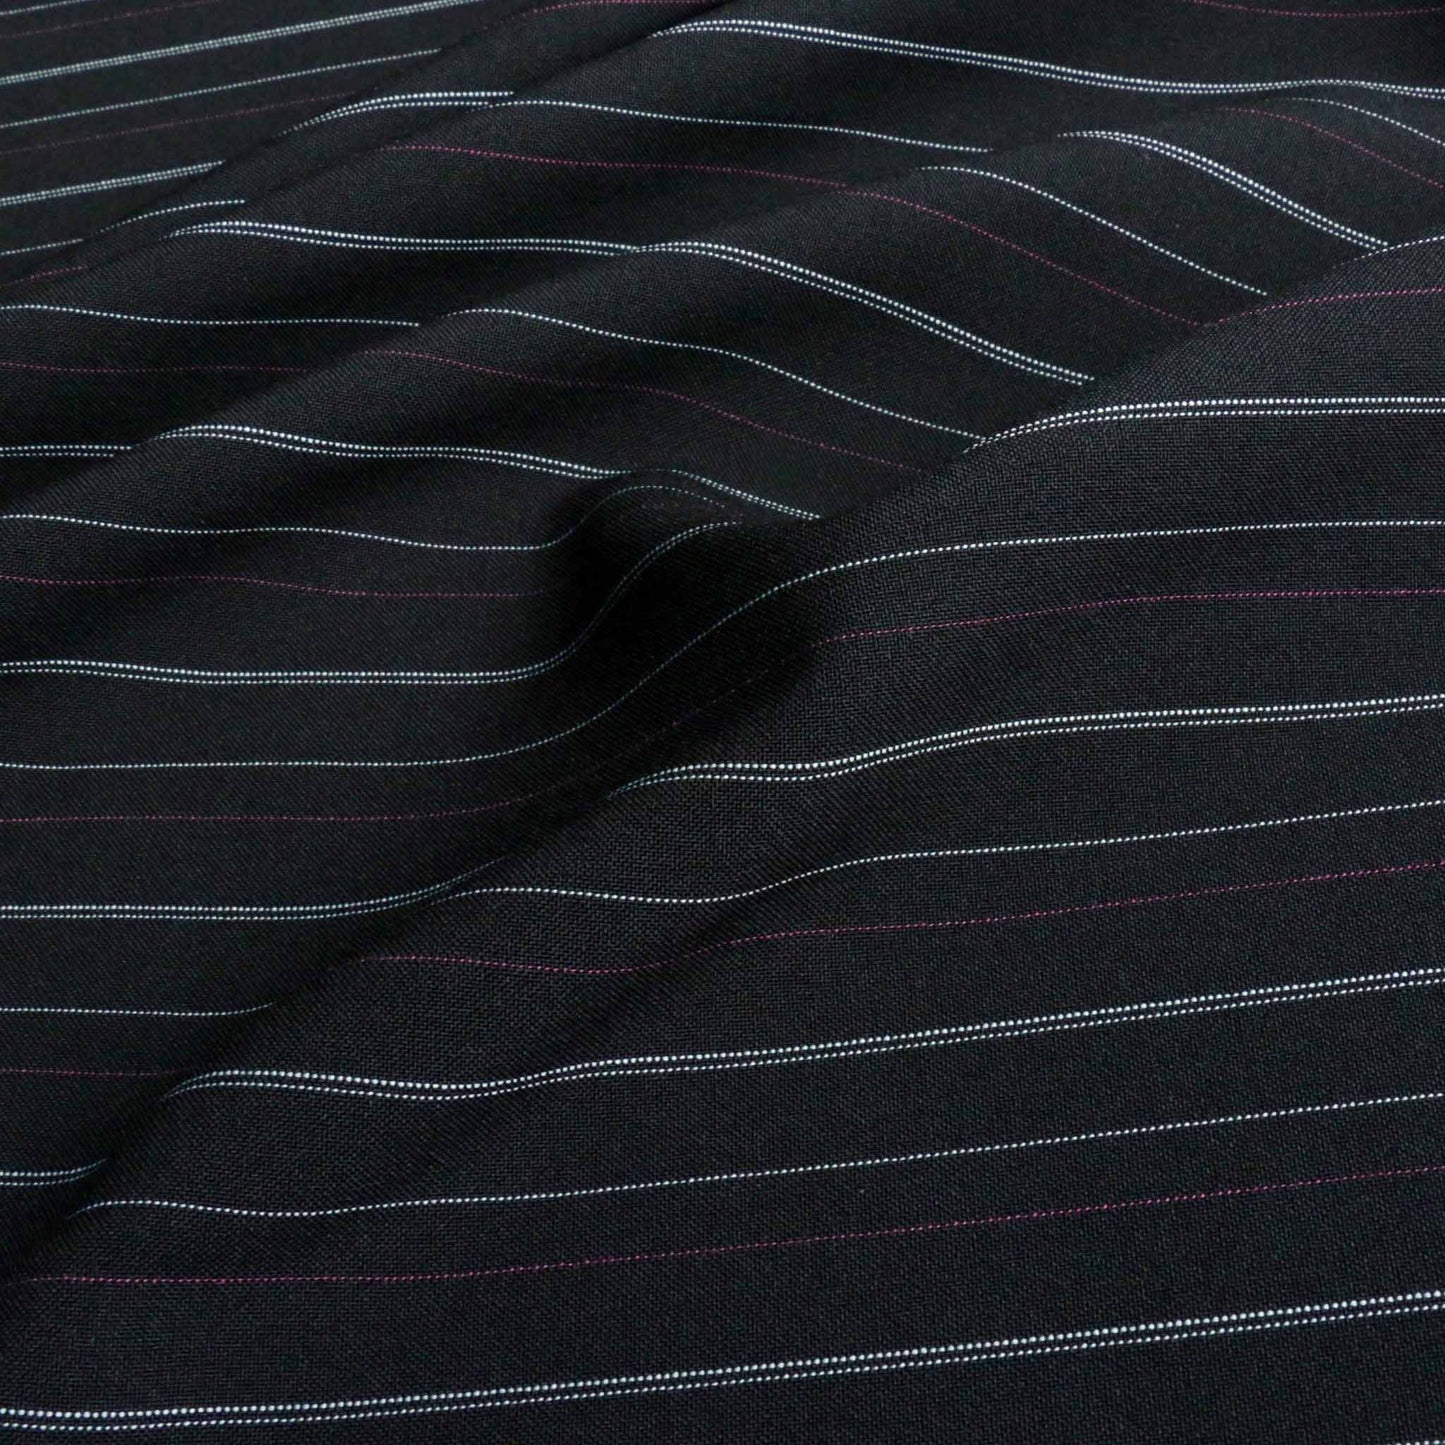 pink and white pinstripe on black stretchy suiting fabric